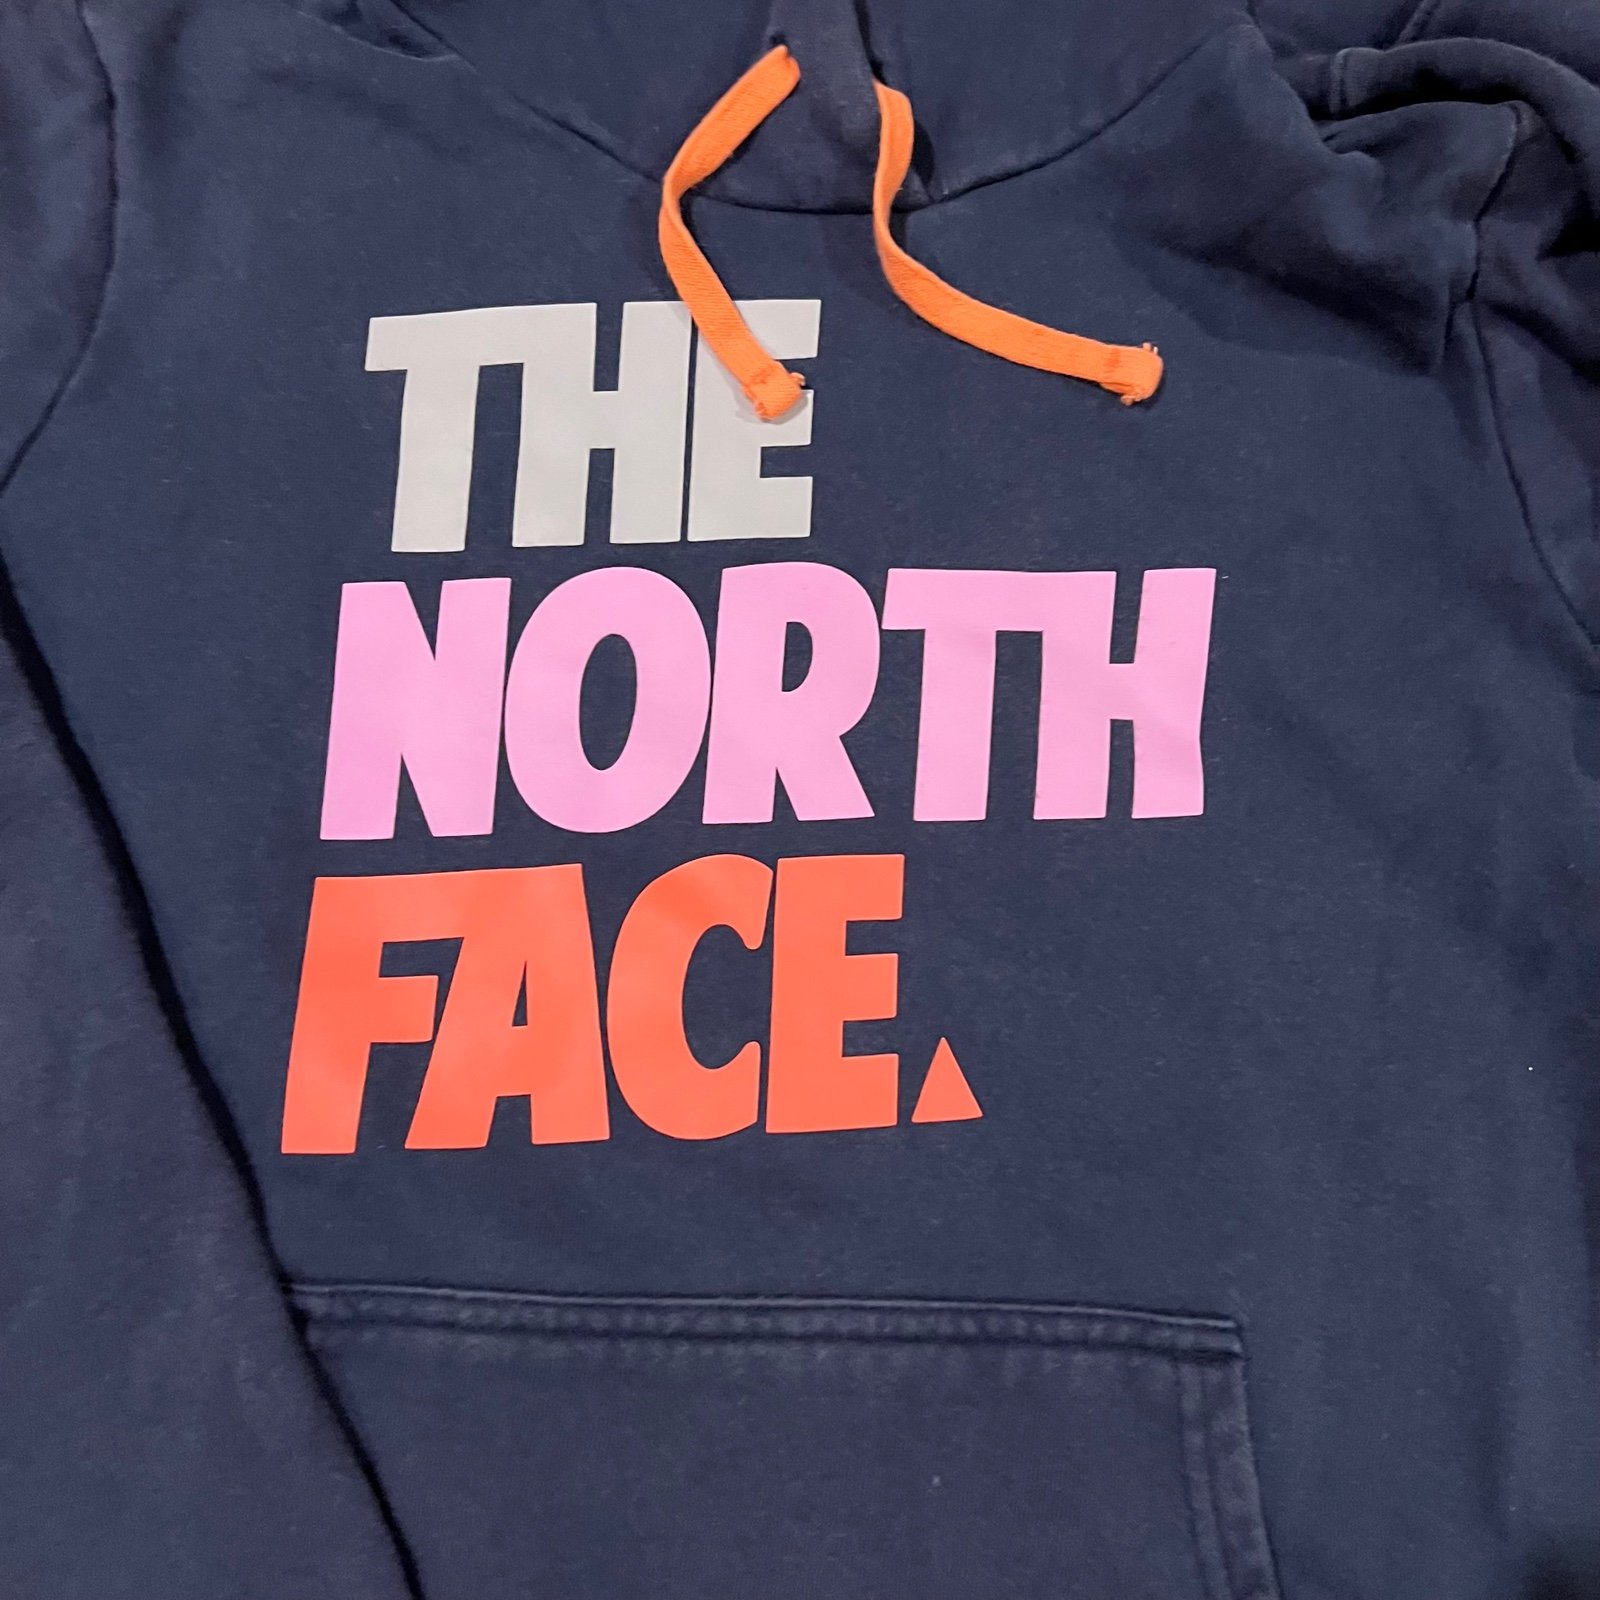 good price The north face hoodie | small je2Iucm4p High Quaity